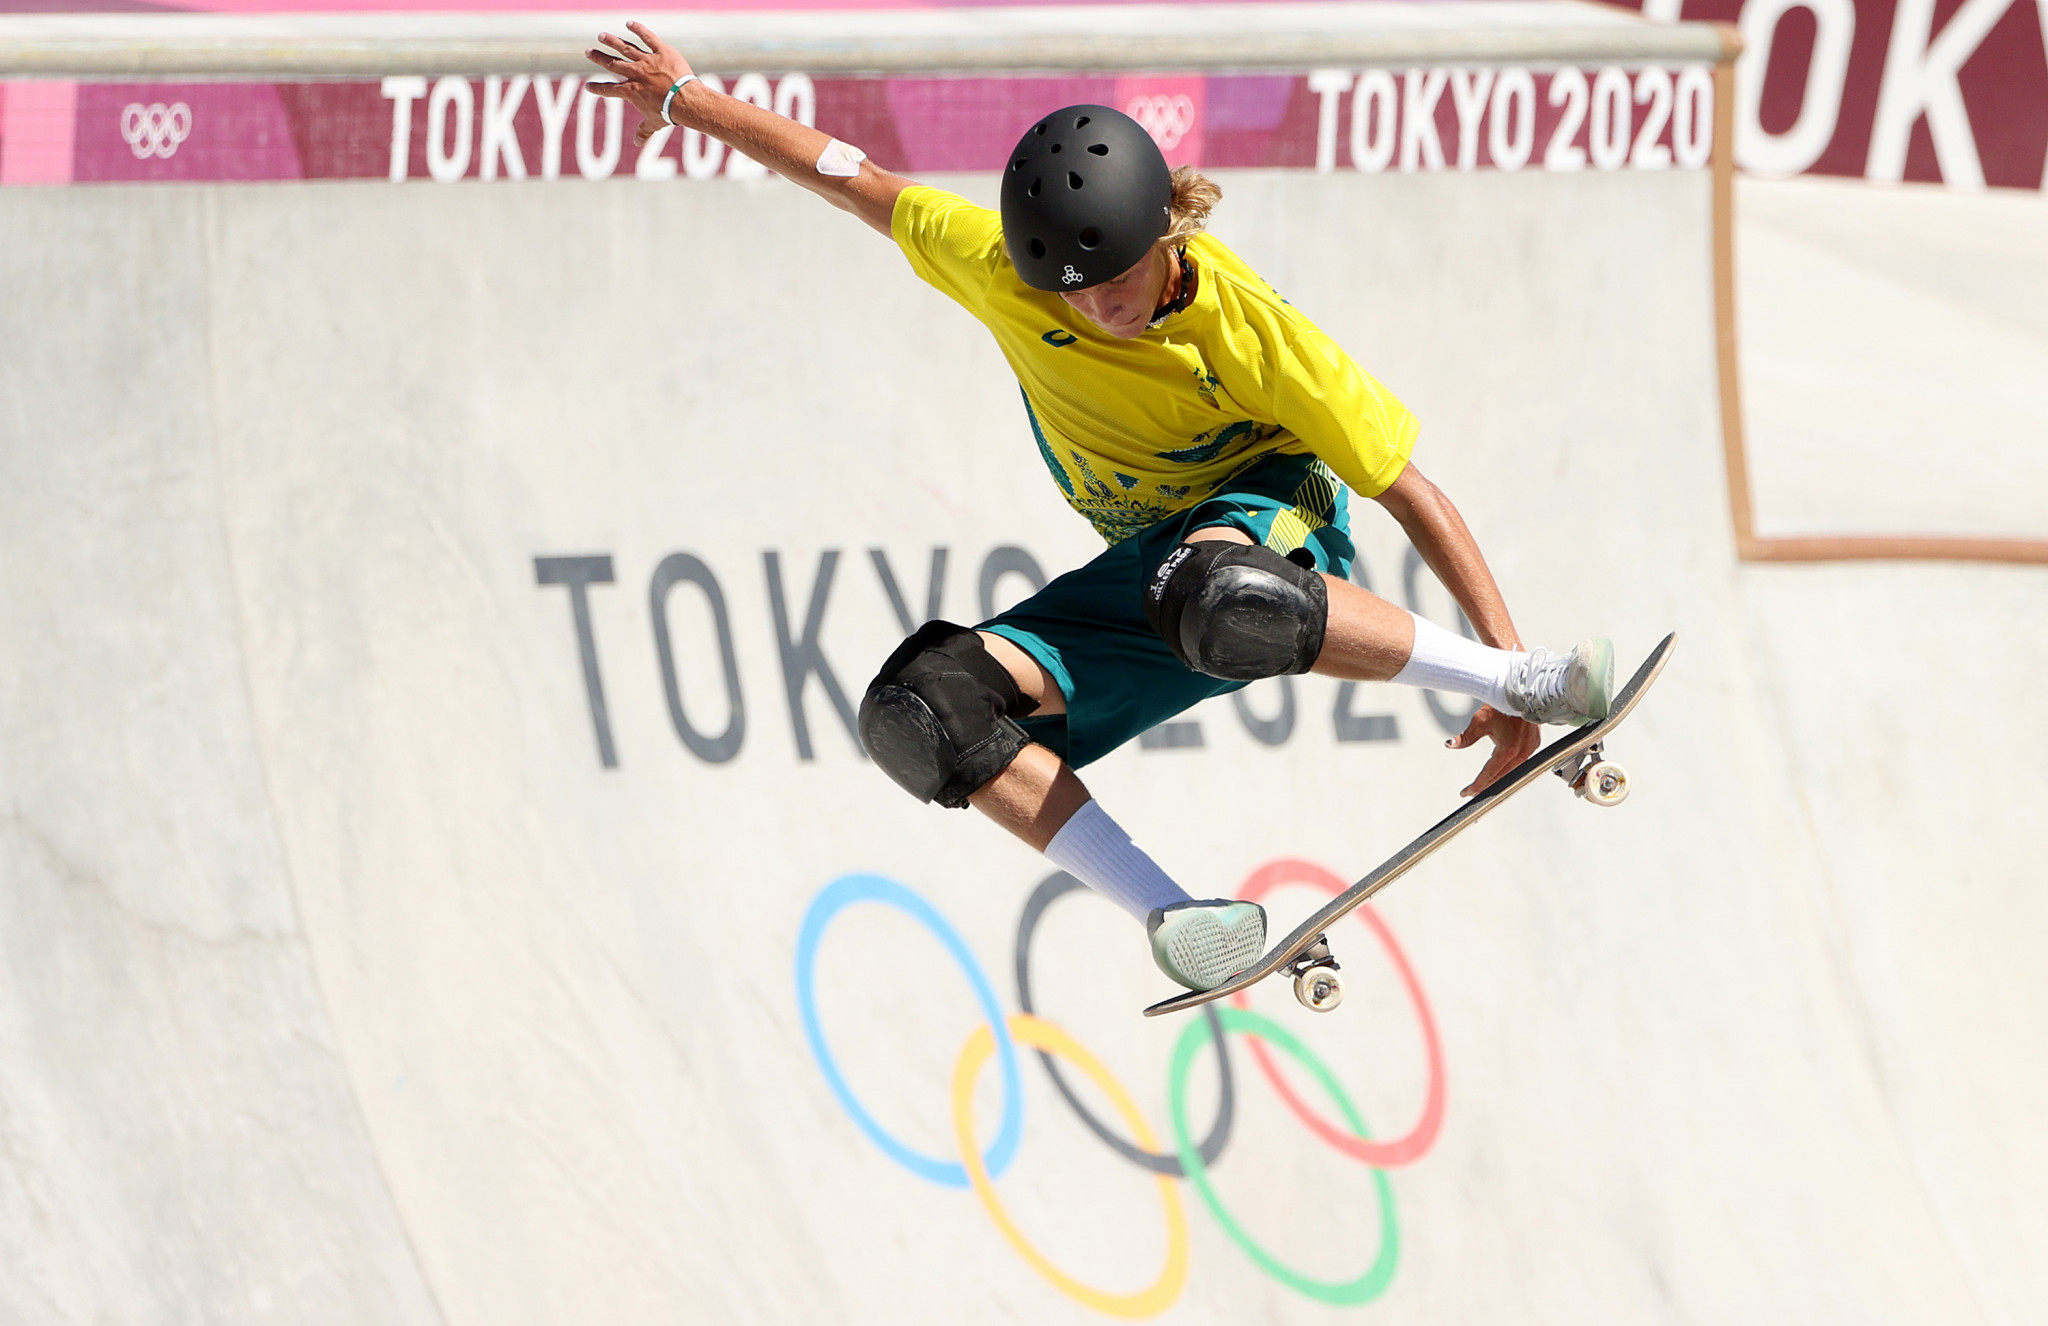 Skateboarding made its Olympic debut at Tokyo 2020, something that Francesco Zangarini hopes scooter and roller freestyle can replicate in the future ©Getty Images